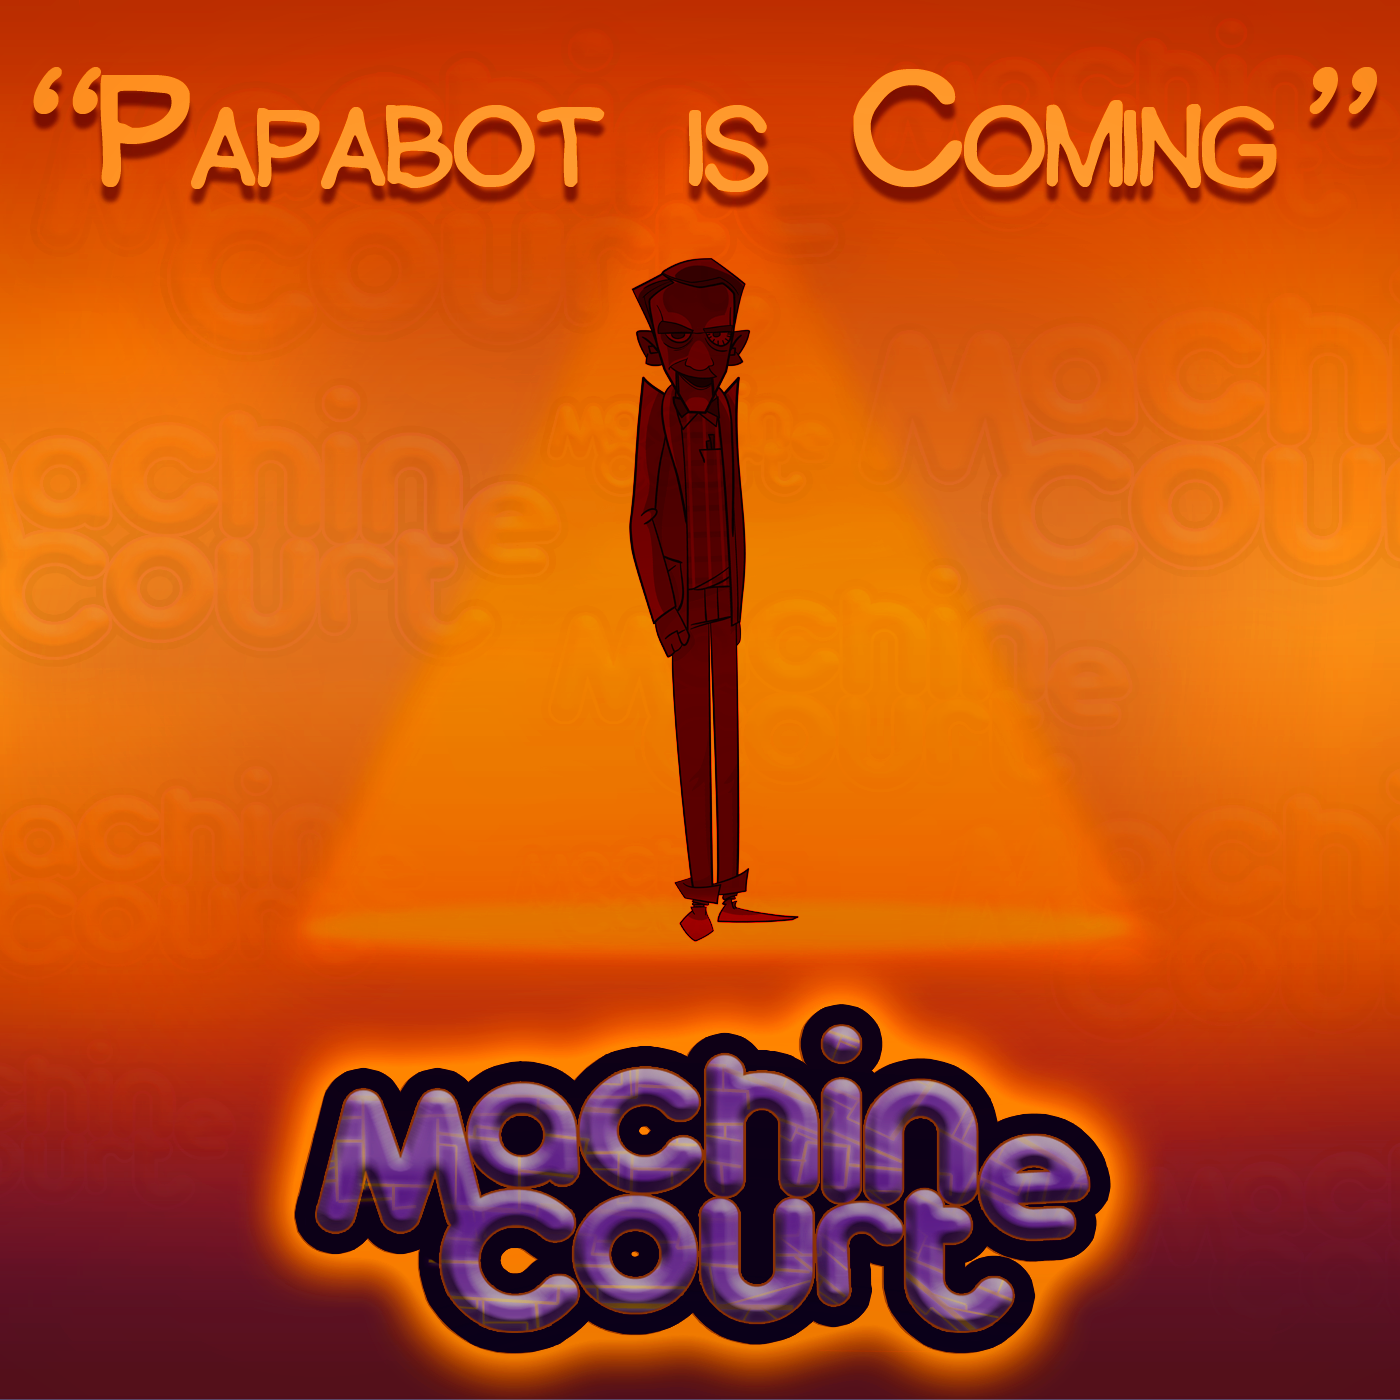 1.11 “Papabot is Coming”